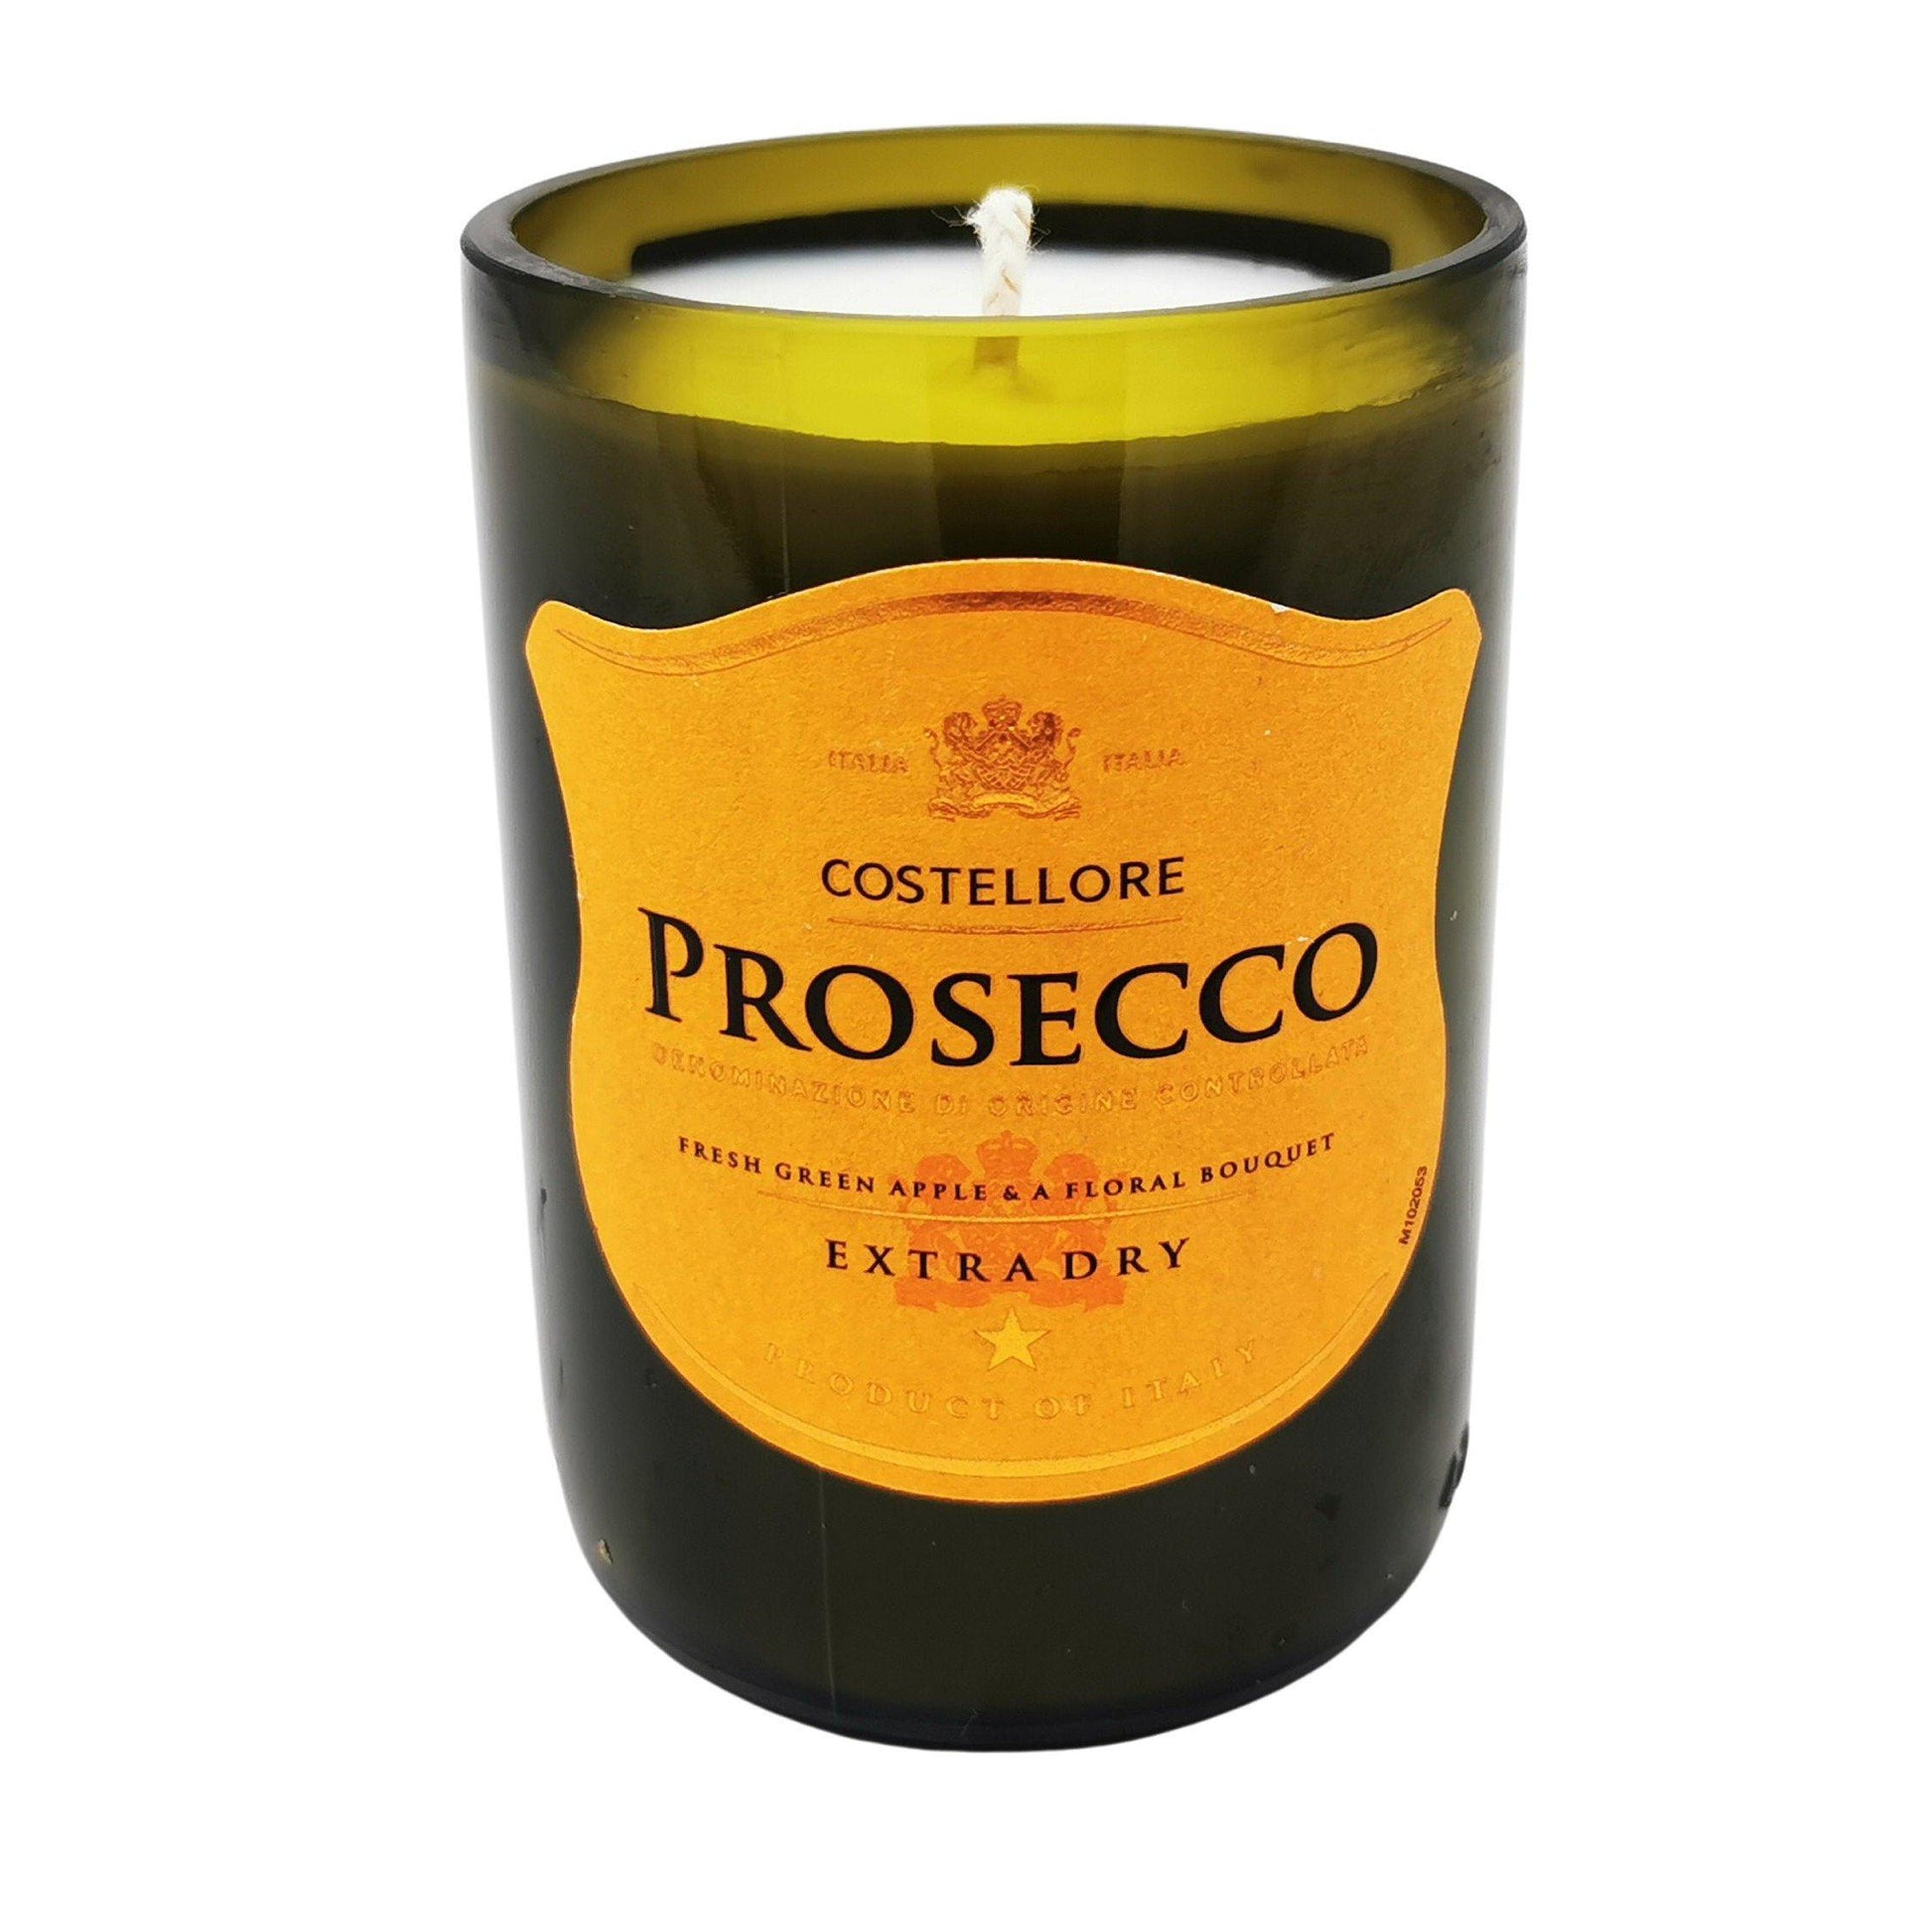 Costellore Prosecco Bottle Candle Wine & Prosecco Bottle Candles Adhock Homeware